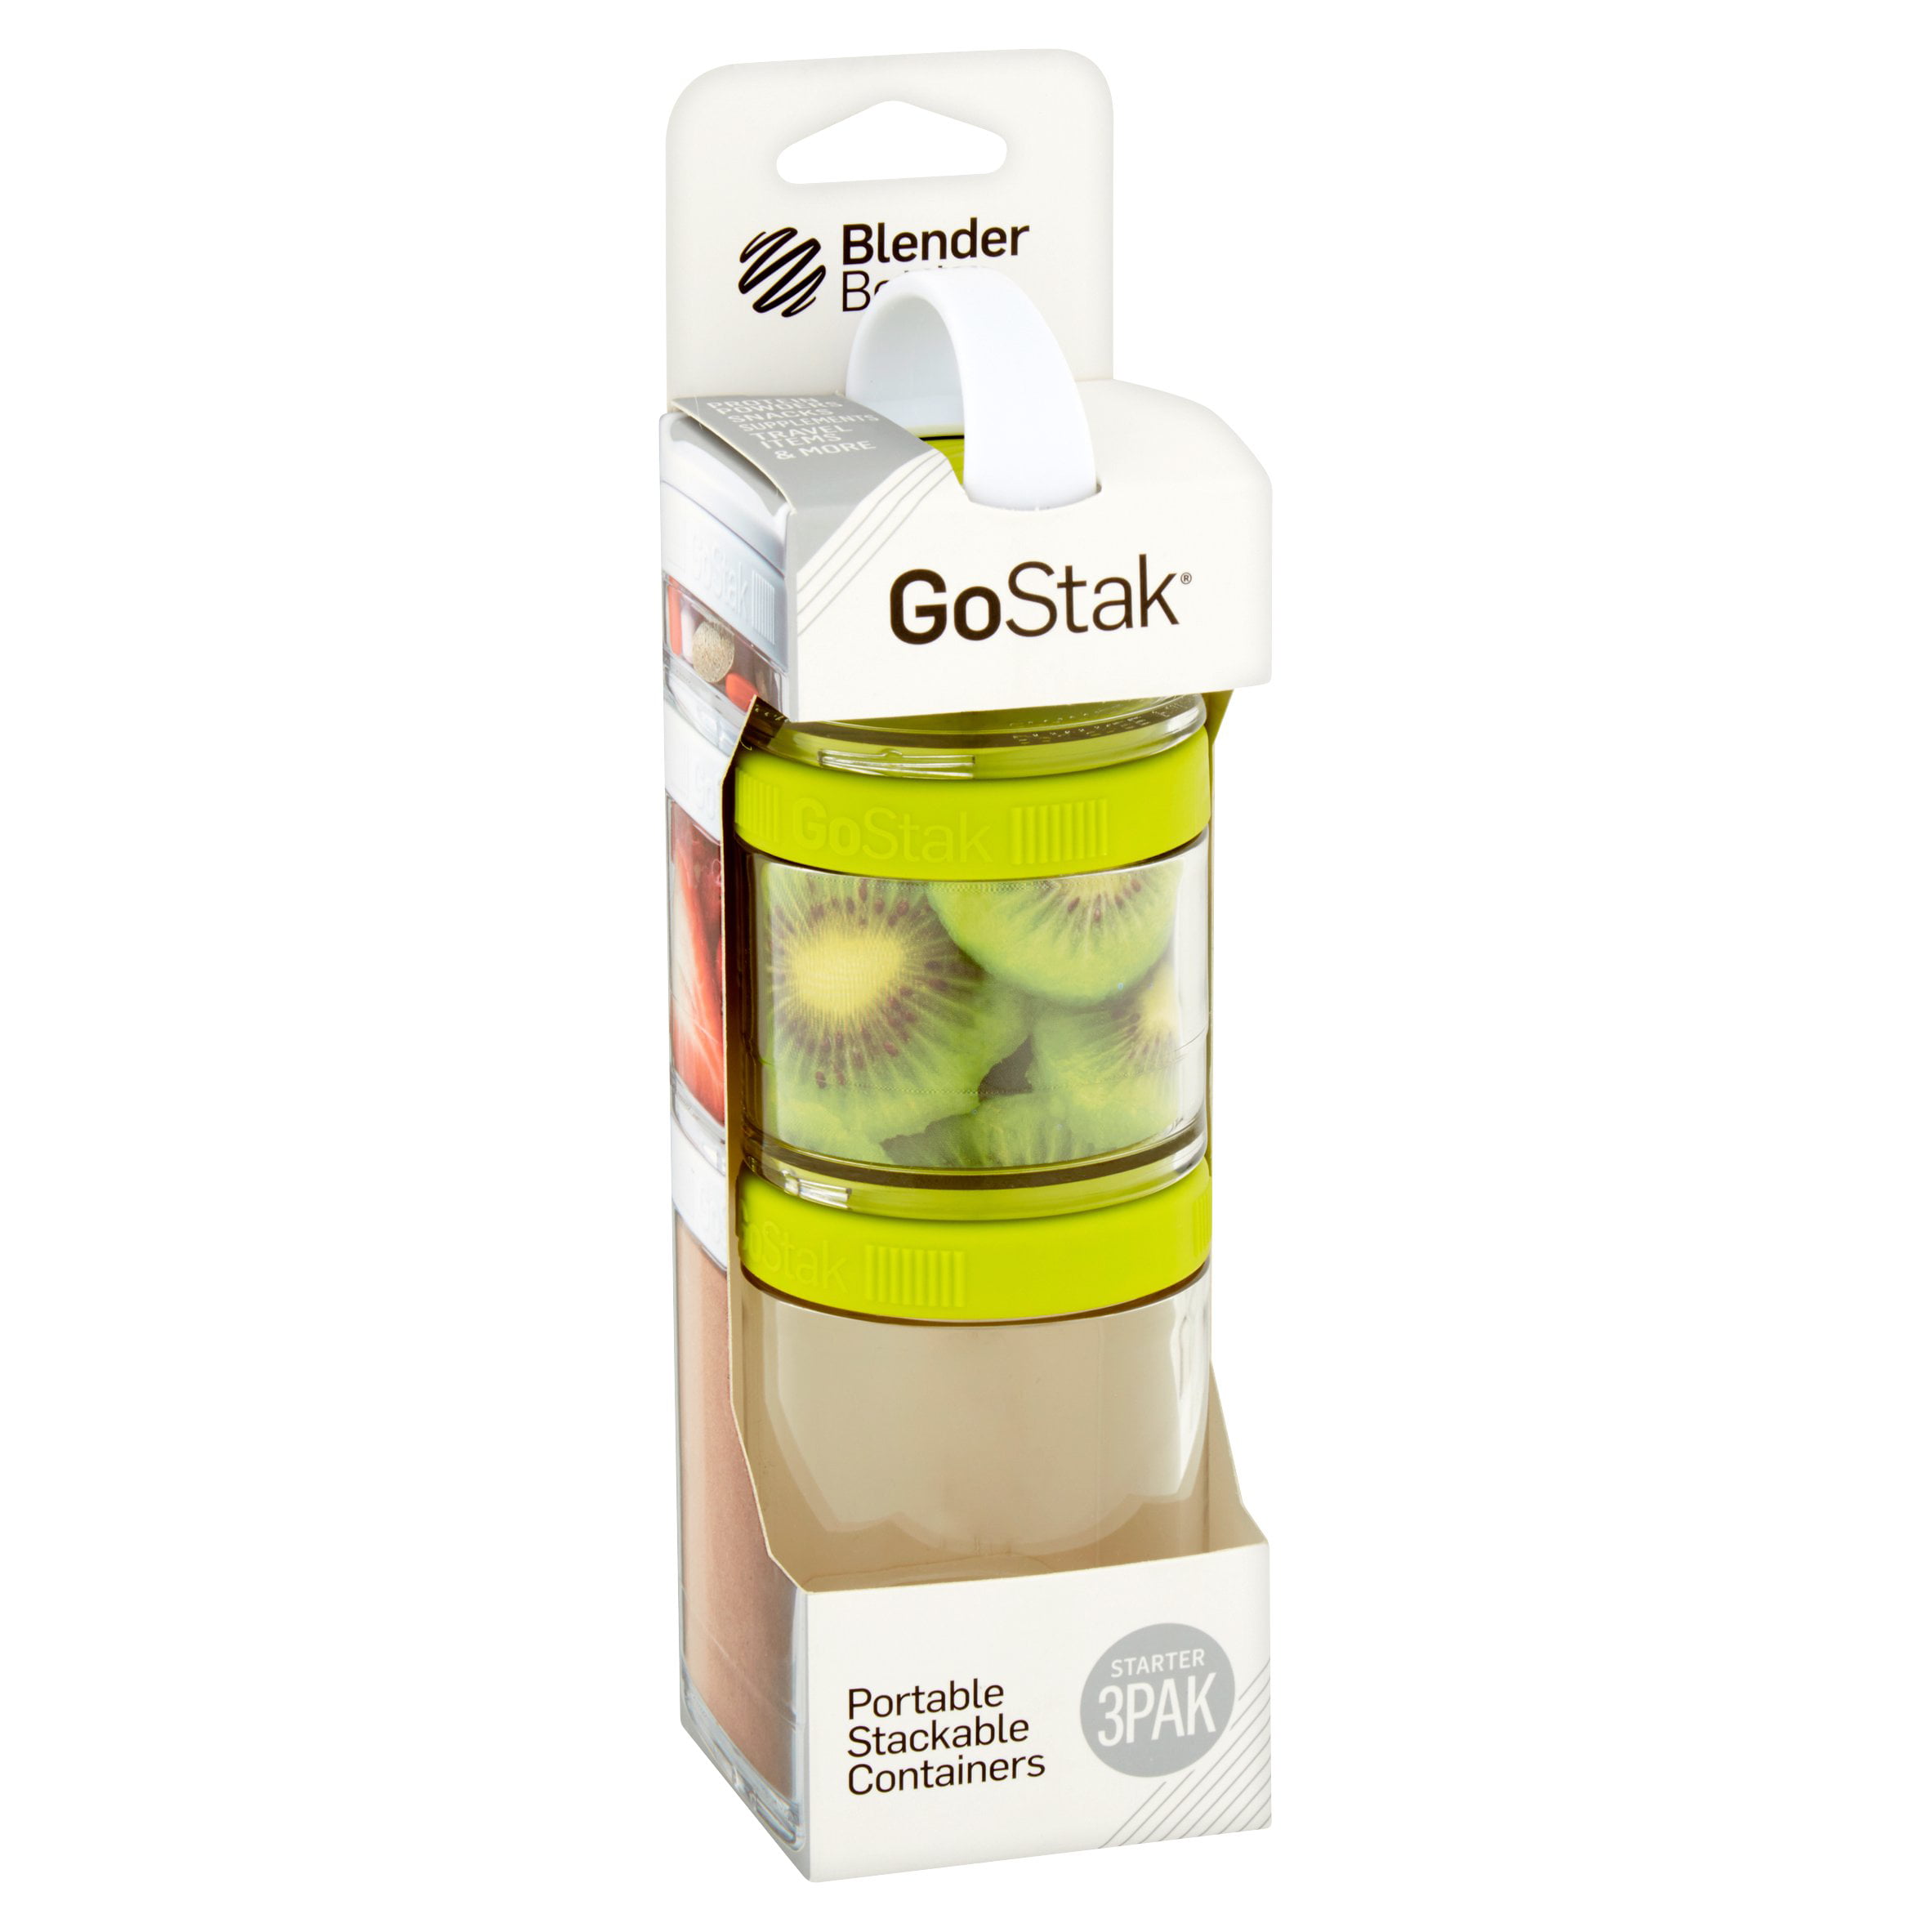 GoStak, Portable Stackable Containers, Plum, Starter 4 Pack